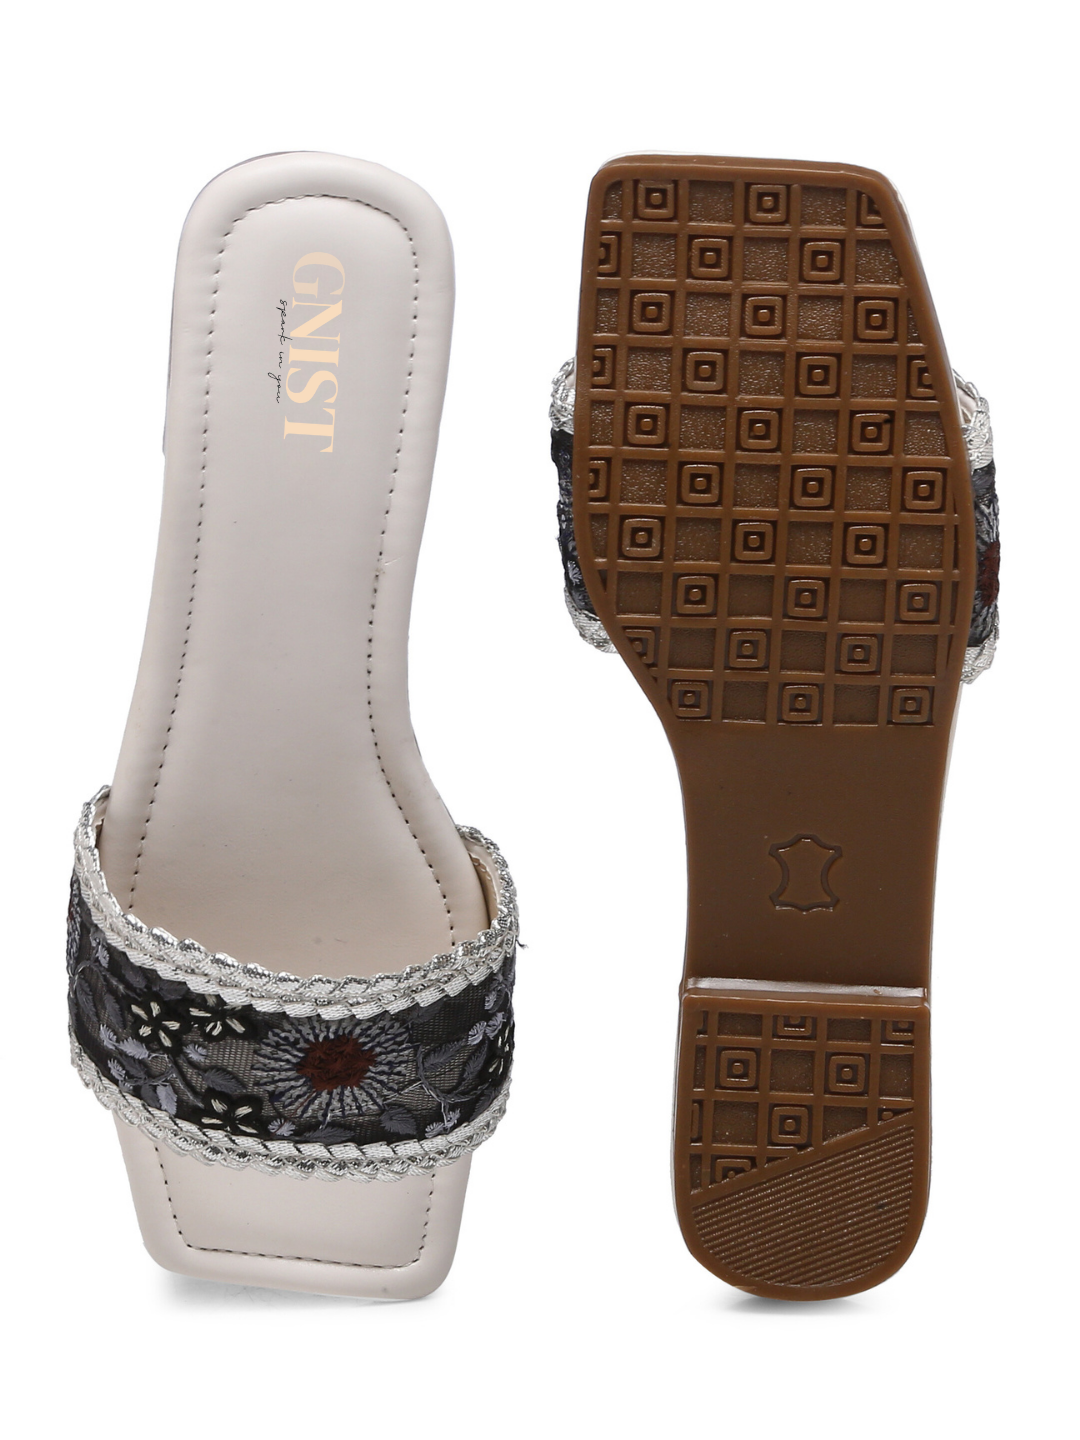 GNIST BlackWhite Embroidered Flats